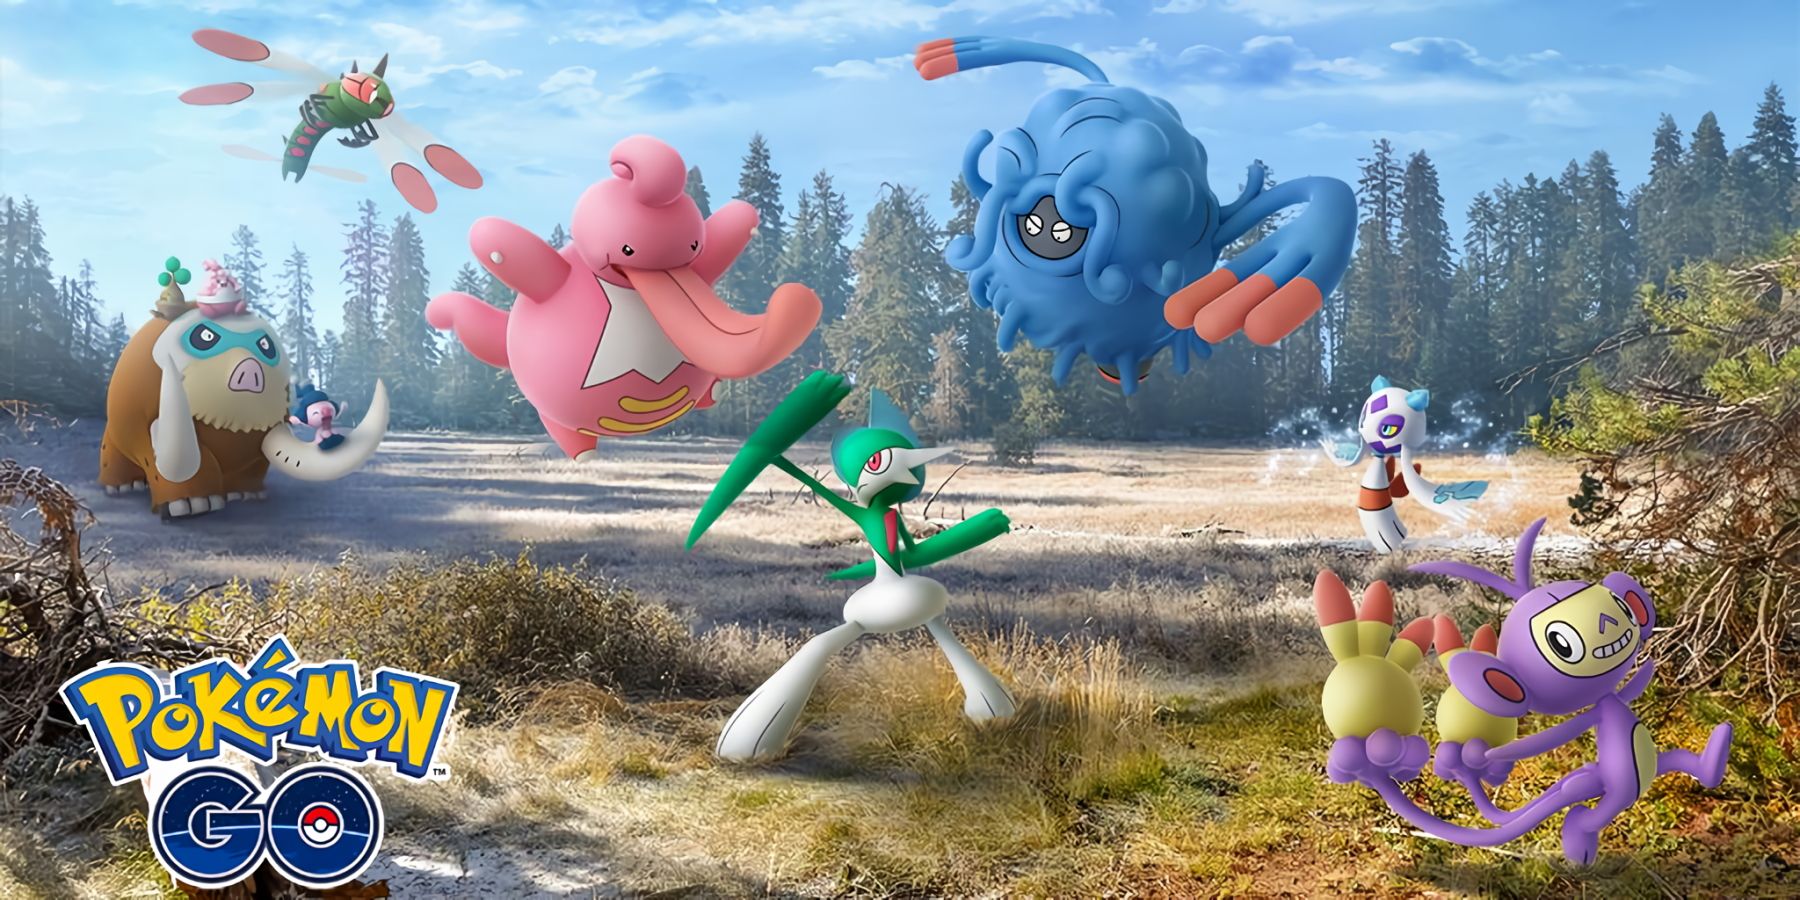 A Pokemon GO key visual showing several Sinnoh Pokemon fighting. Pictured are Gallade, Lickilicky, Yanmega, Mamoswine, Tangrowth, Froslass, and Ambipom.